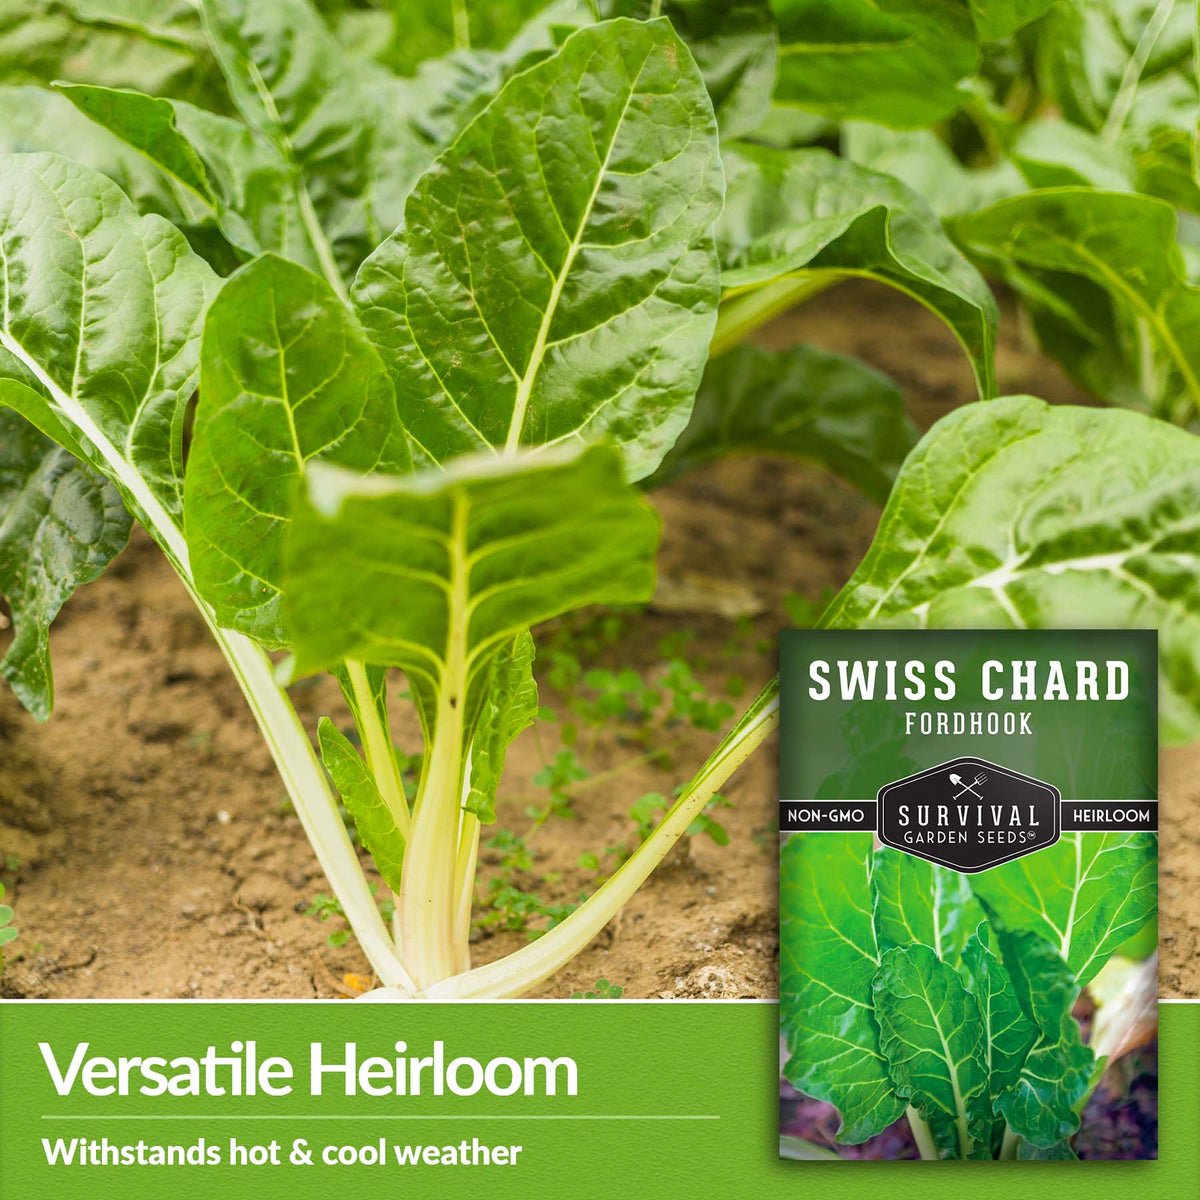 Fordhook Swiss Chard is a versatile heirloom that withstands hot and cool weather